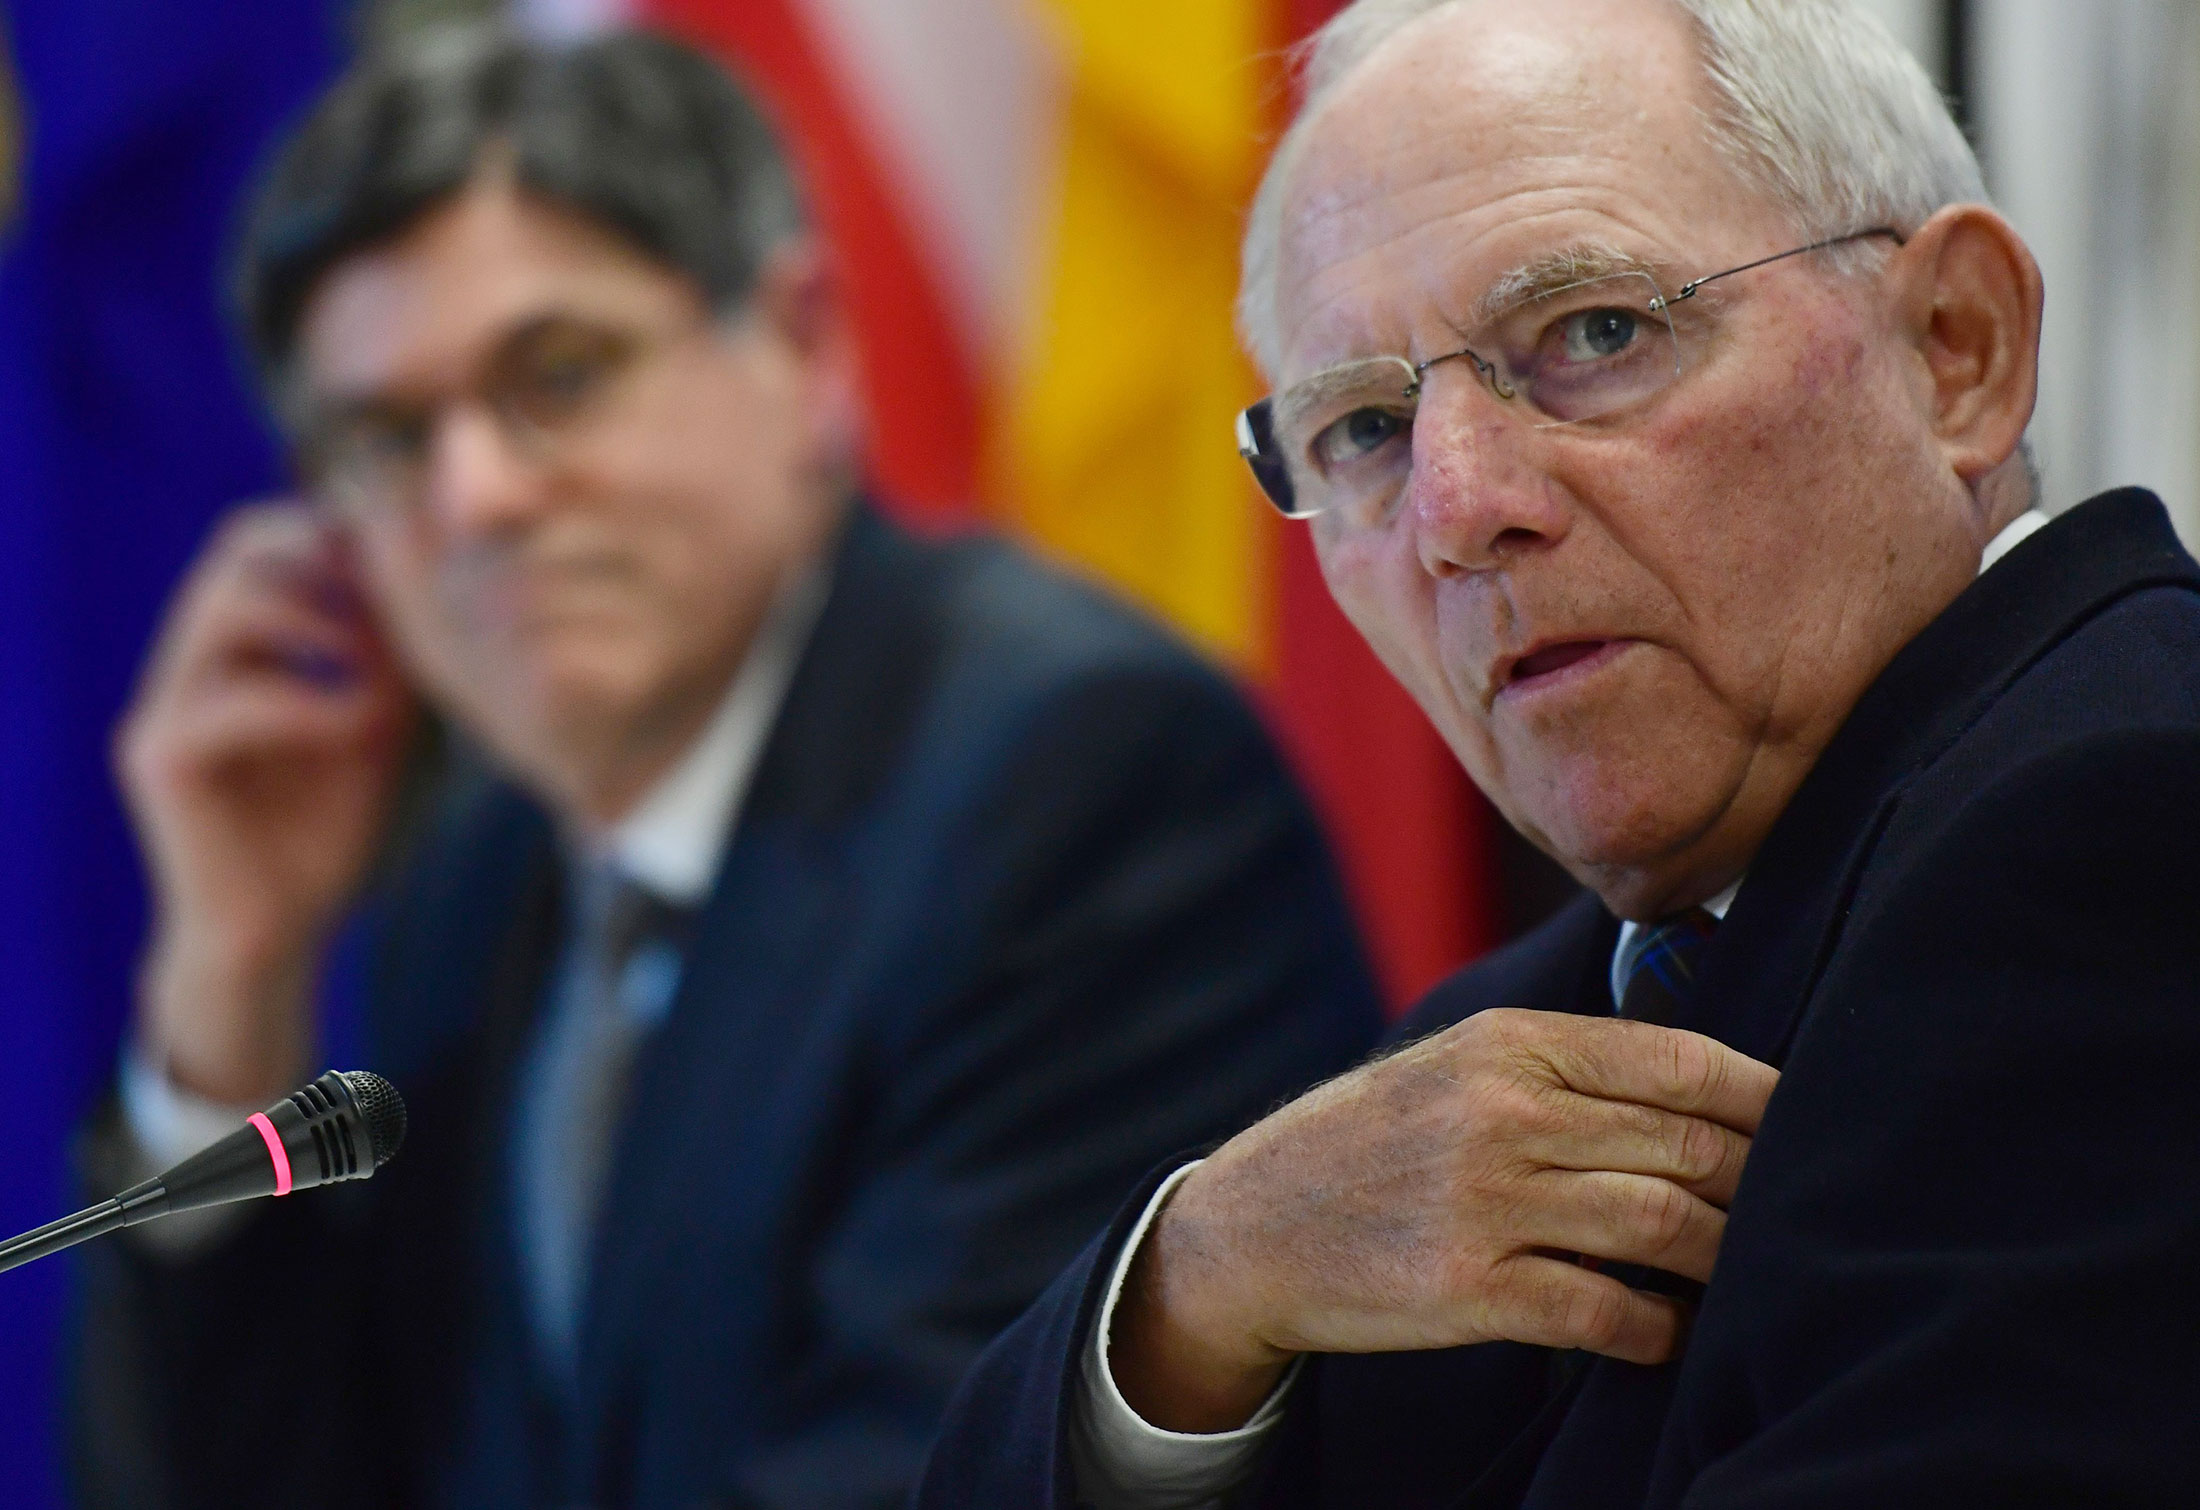 German Finance Minister Wolfgang Schaeuble and U.S. Treasury Secretary Jacob Lew give a joint news conference in Berlin, on July 14.
